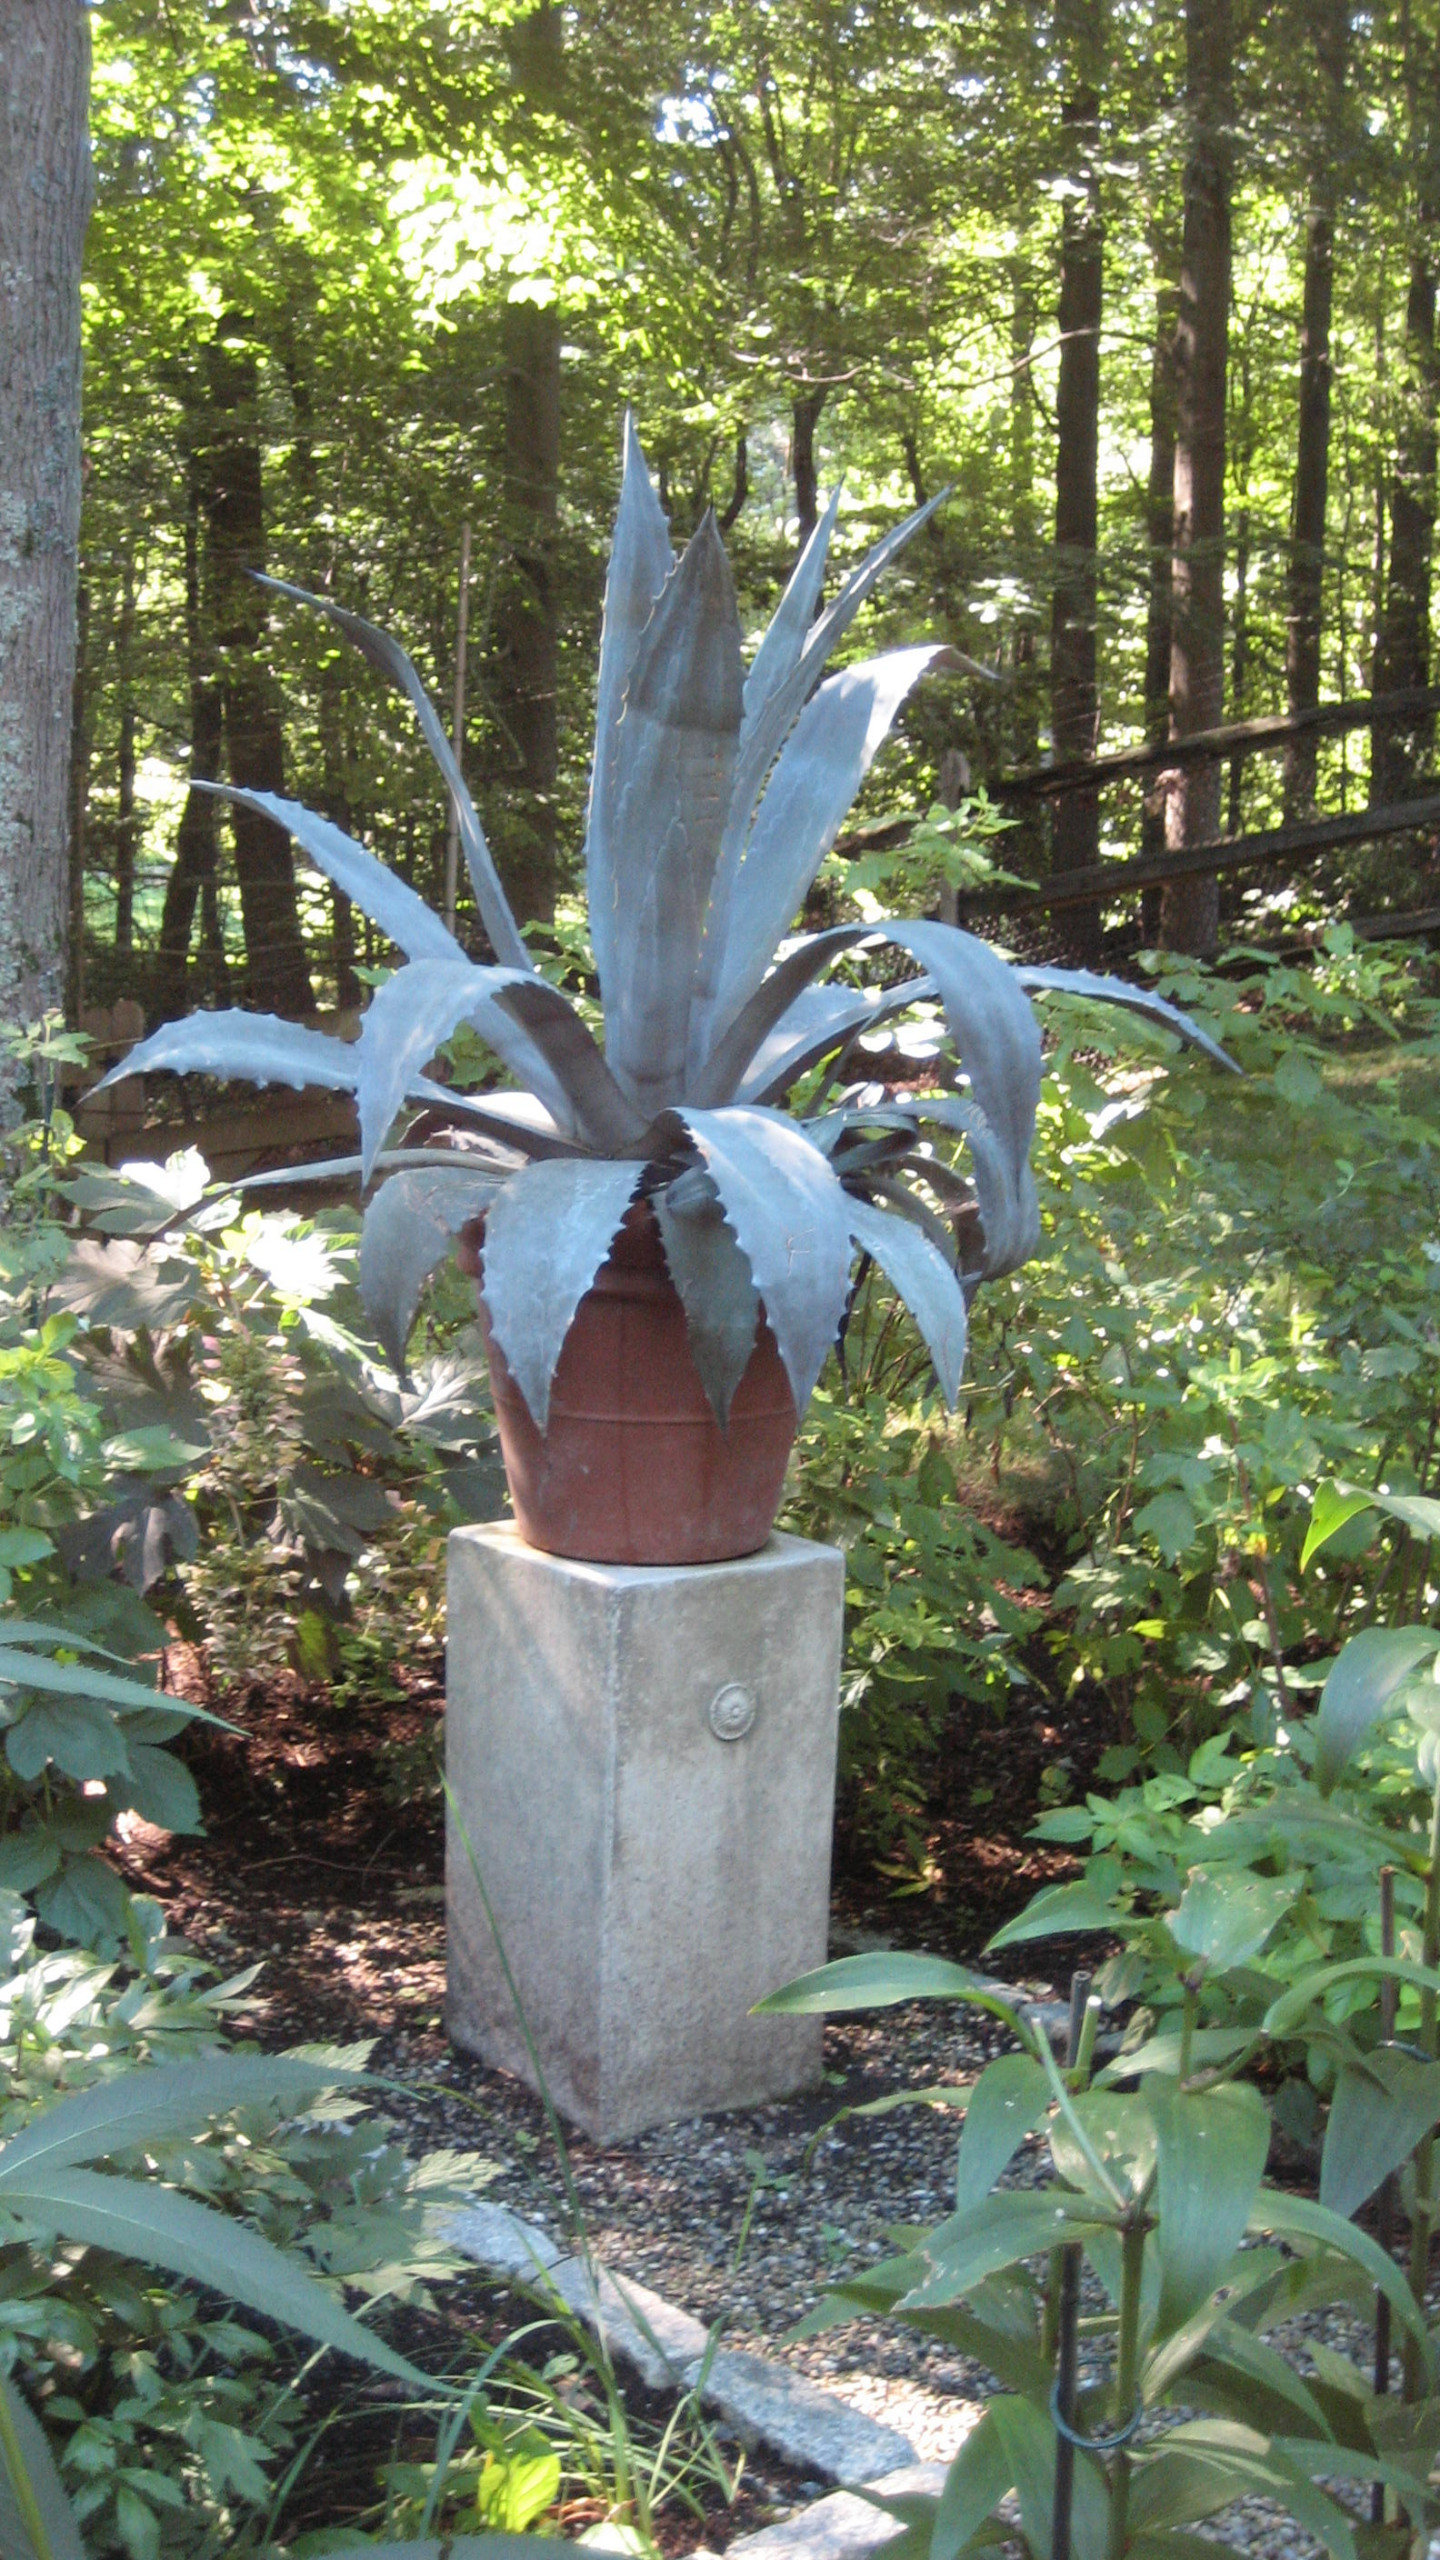 The sculpture of plants are not always in bright colors but still make a solid statement